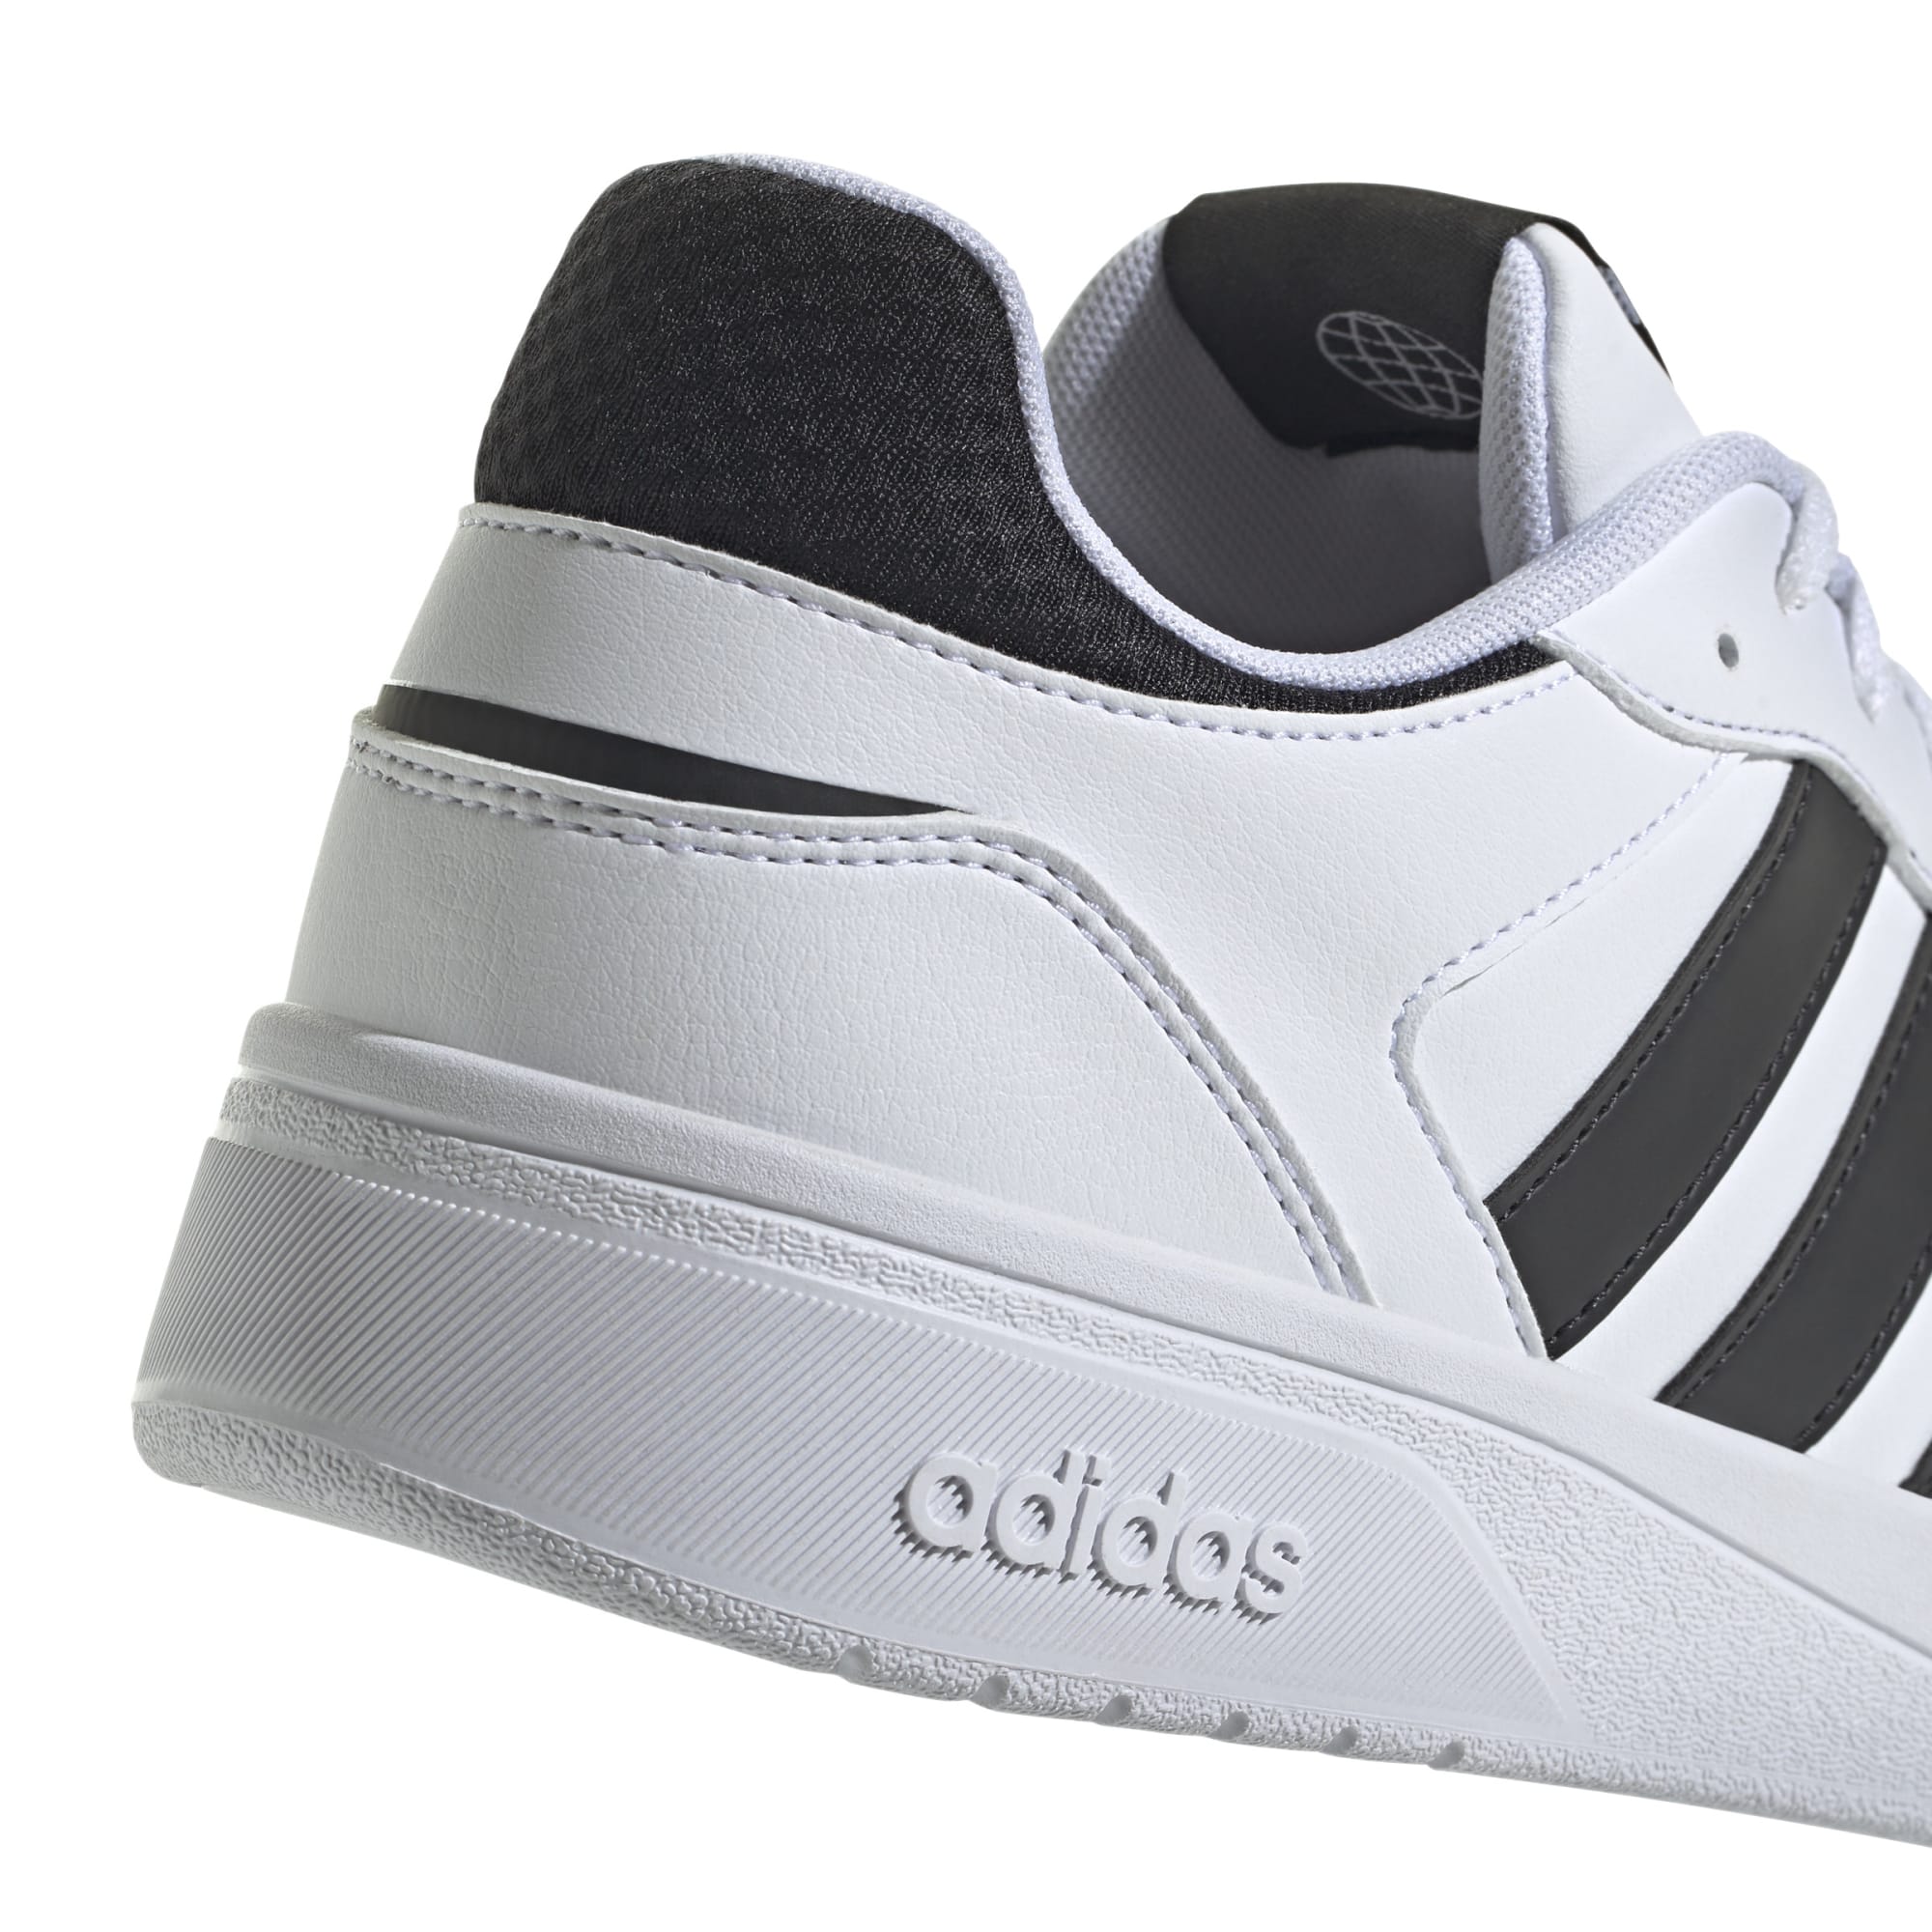 ADIDAS COURTBEAT ID9658 SNEAKER (M)